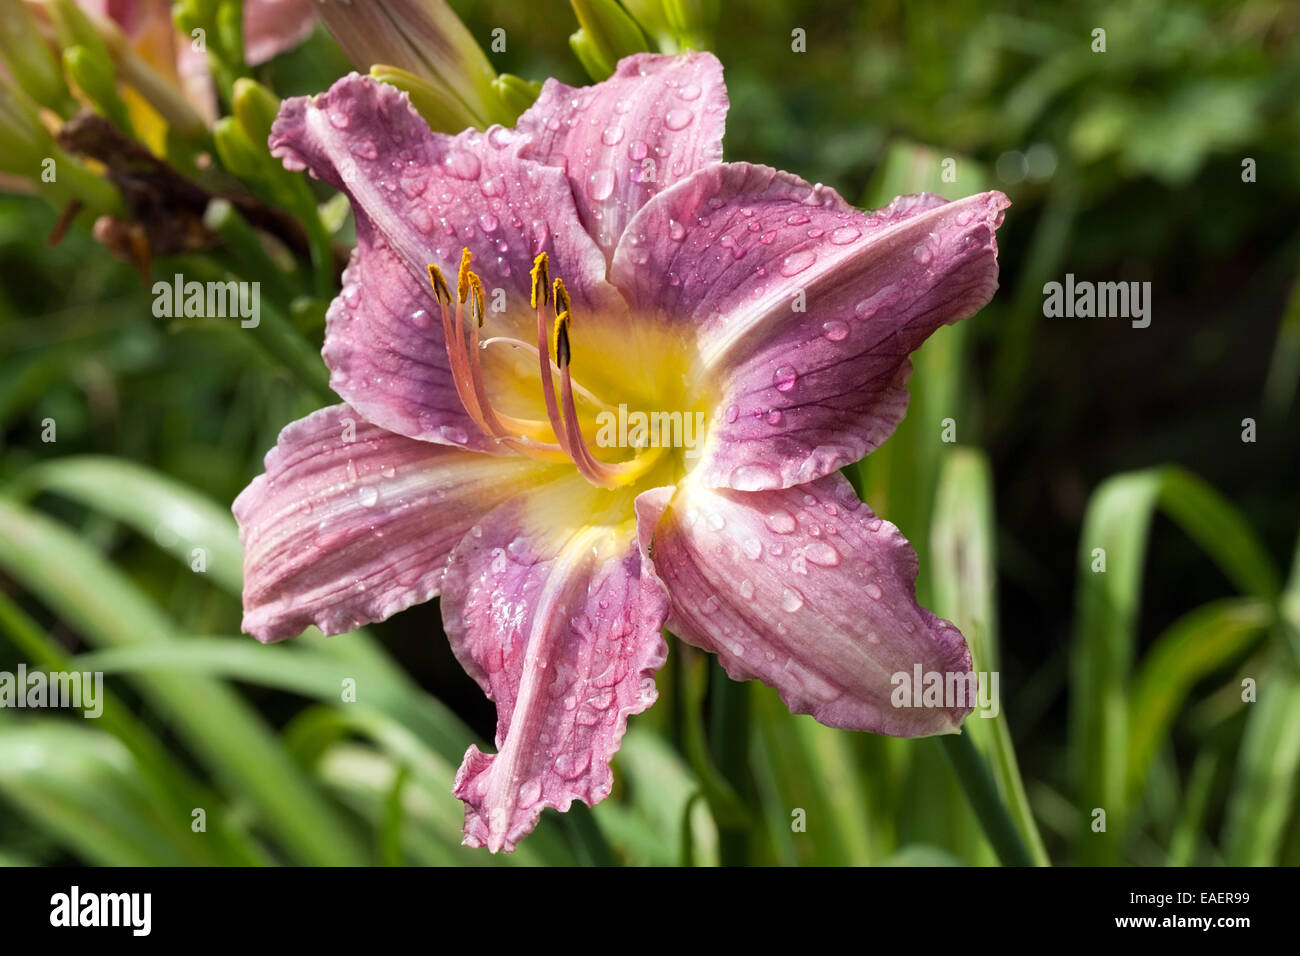 big red lily flower closeup with wilted petals Stock Photo